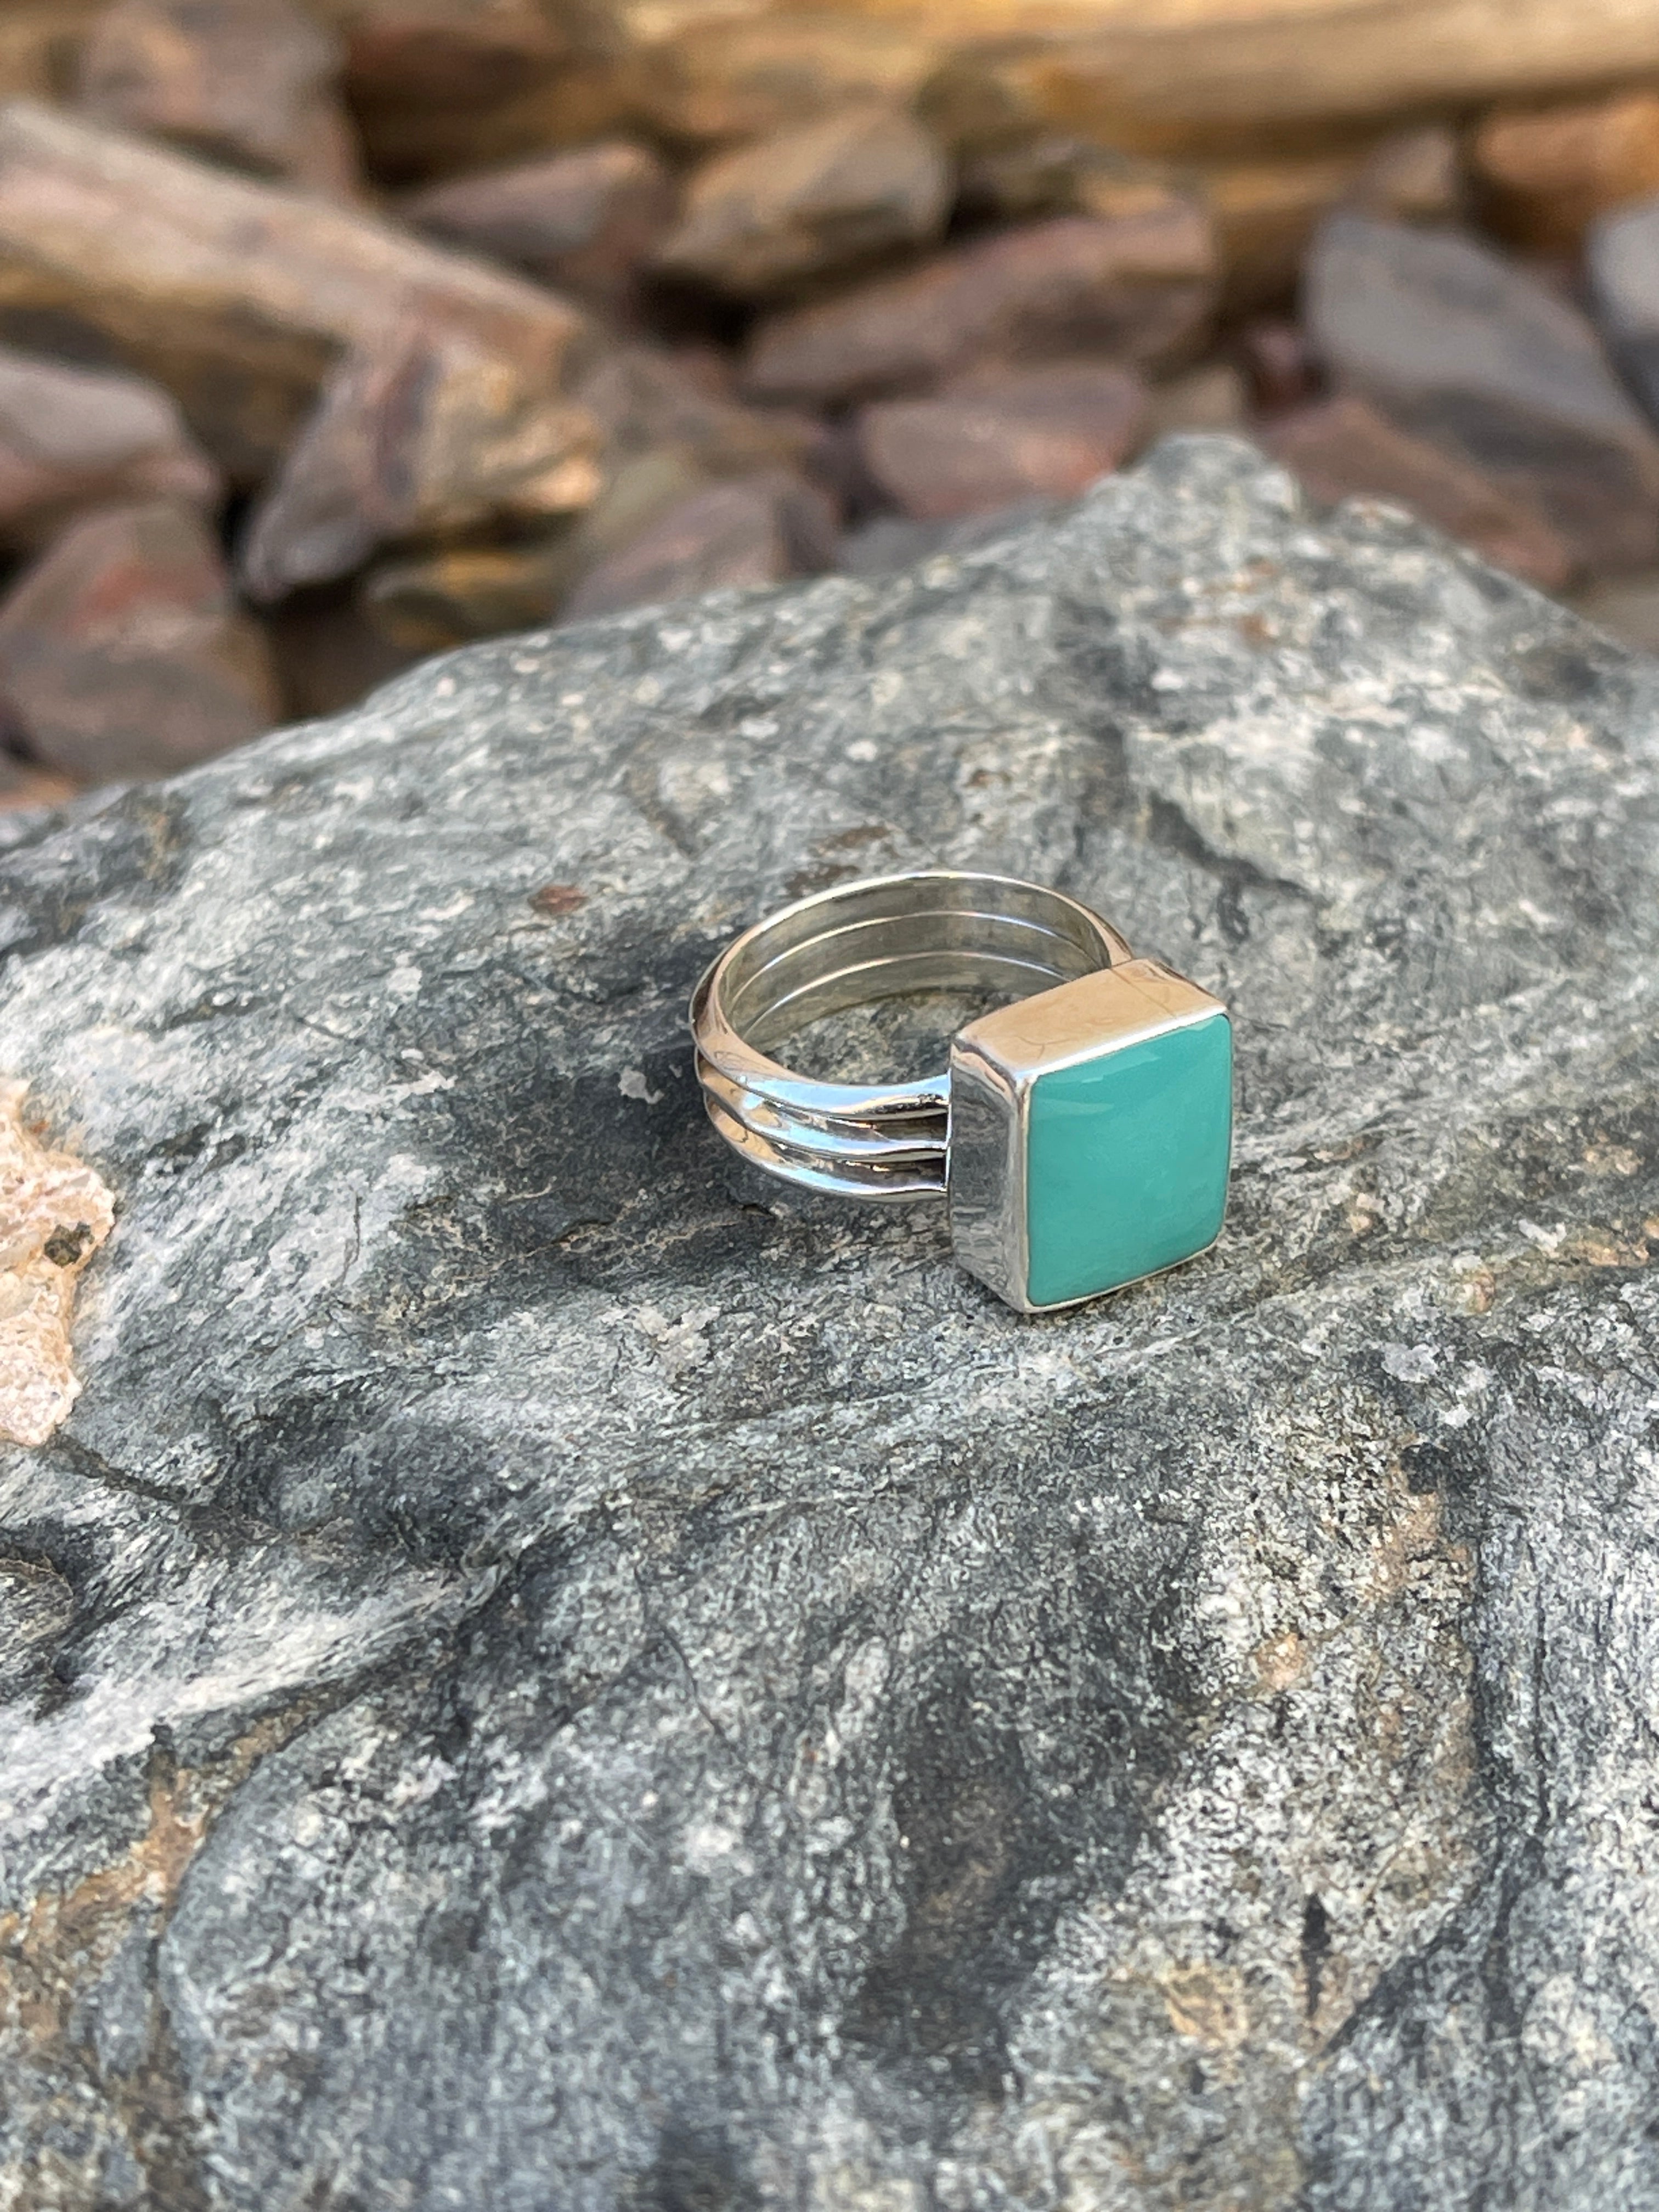 Handmade Solid Sterling Silver Square Cut Kingman Turquoise Plain Bezel Ring - Size 5